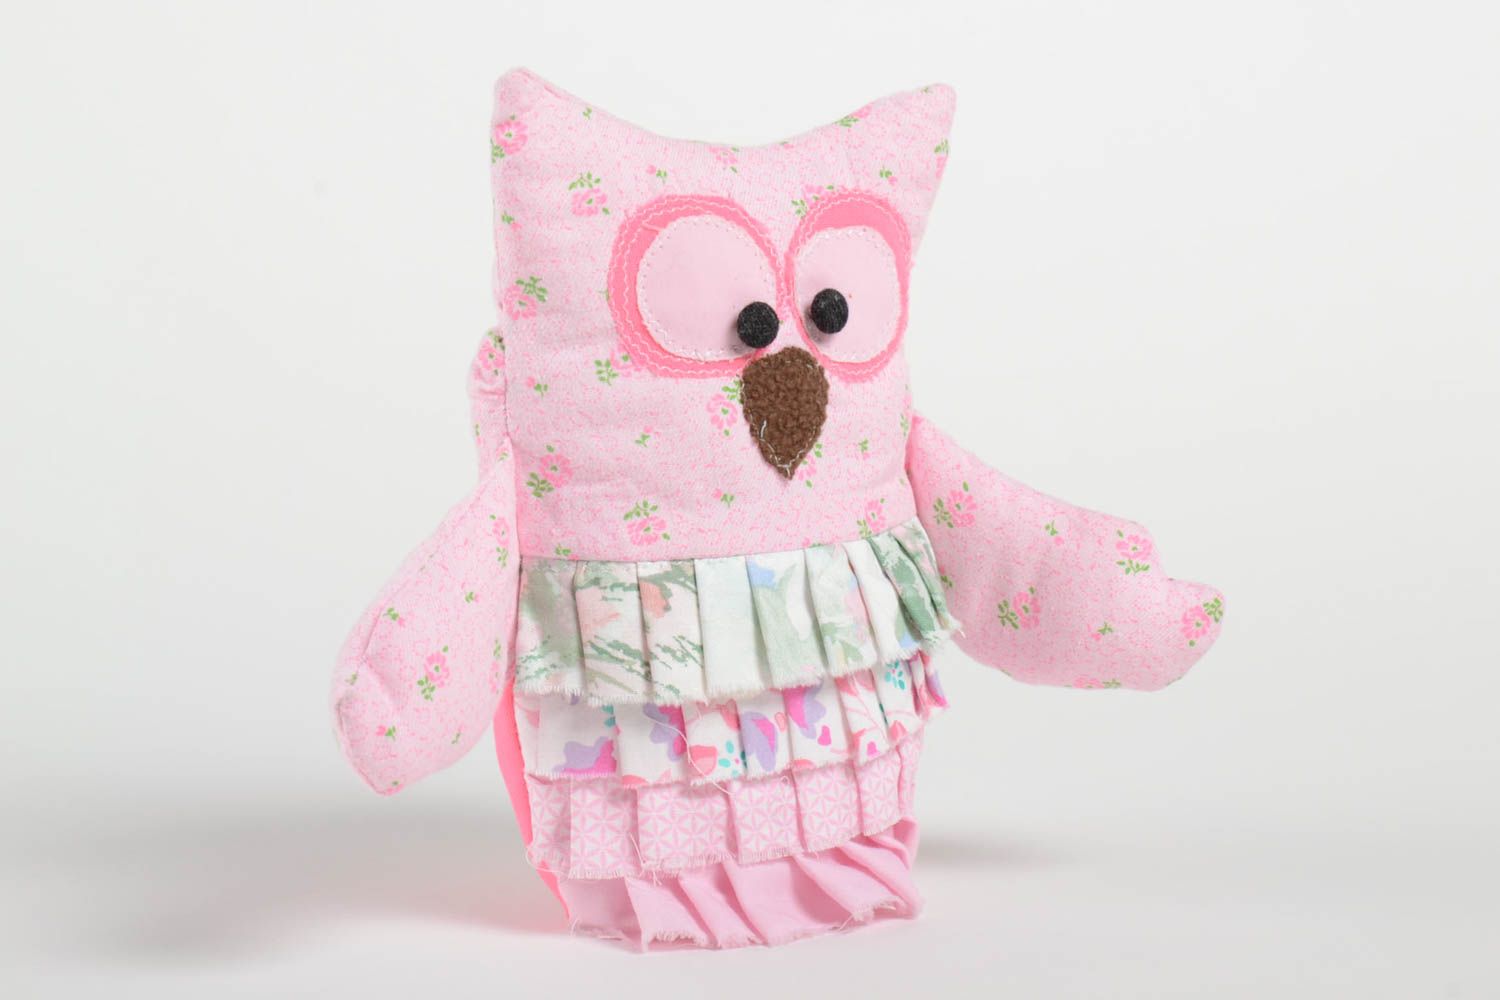 Handmade toy in shape of owl fabric product pink cute gift interior design   photo 2